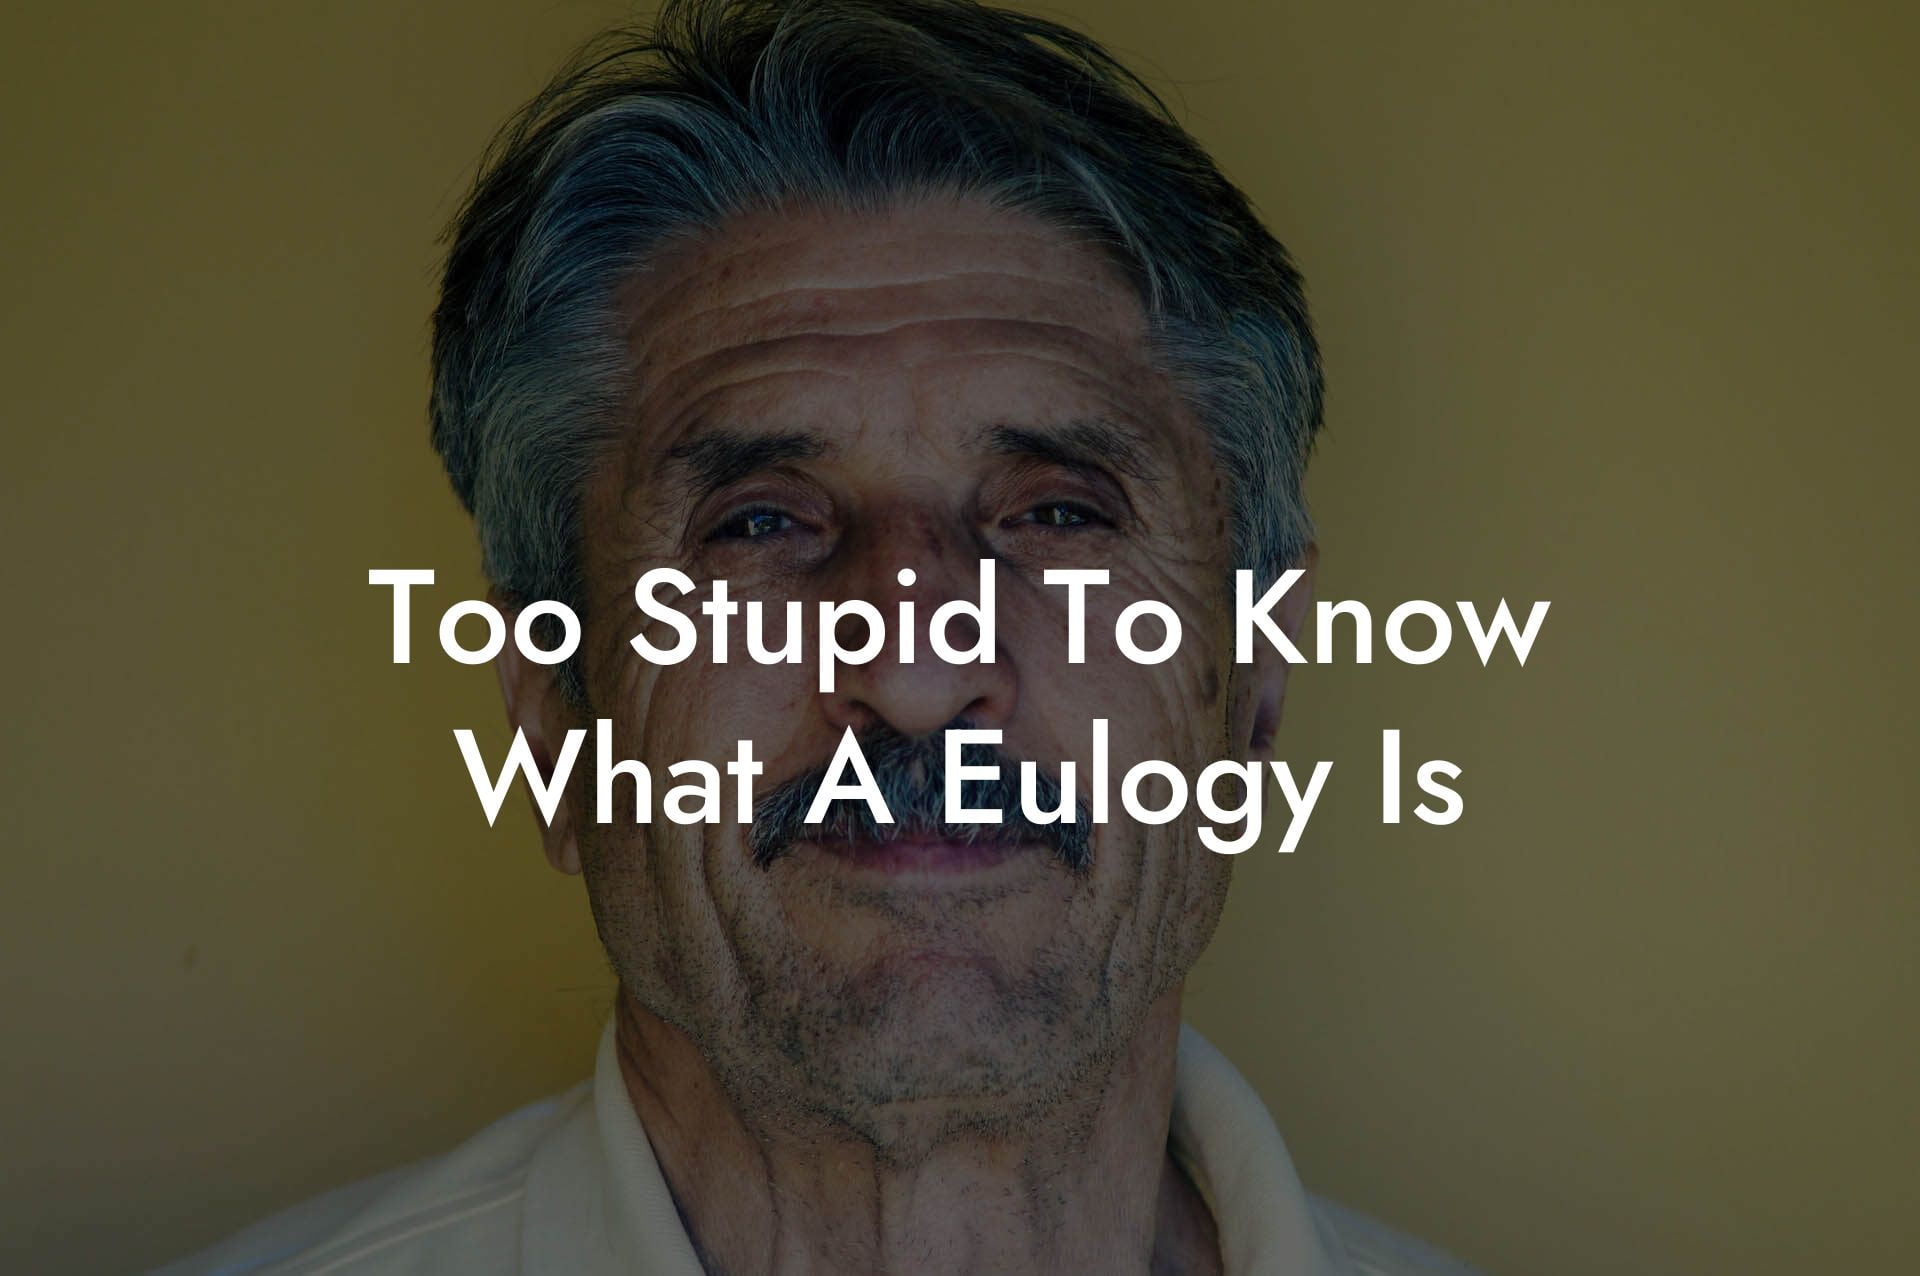 Too Stupid To Know What A Eulogy Is